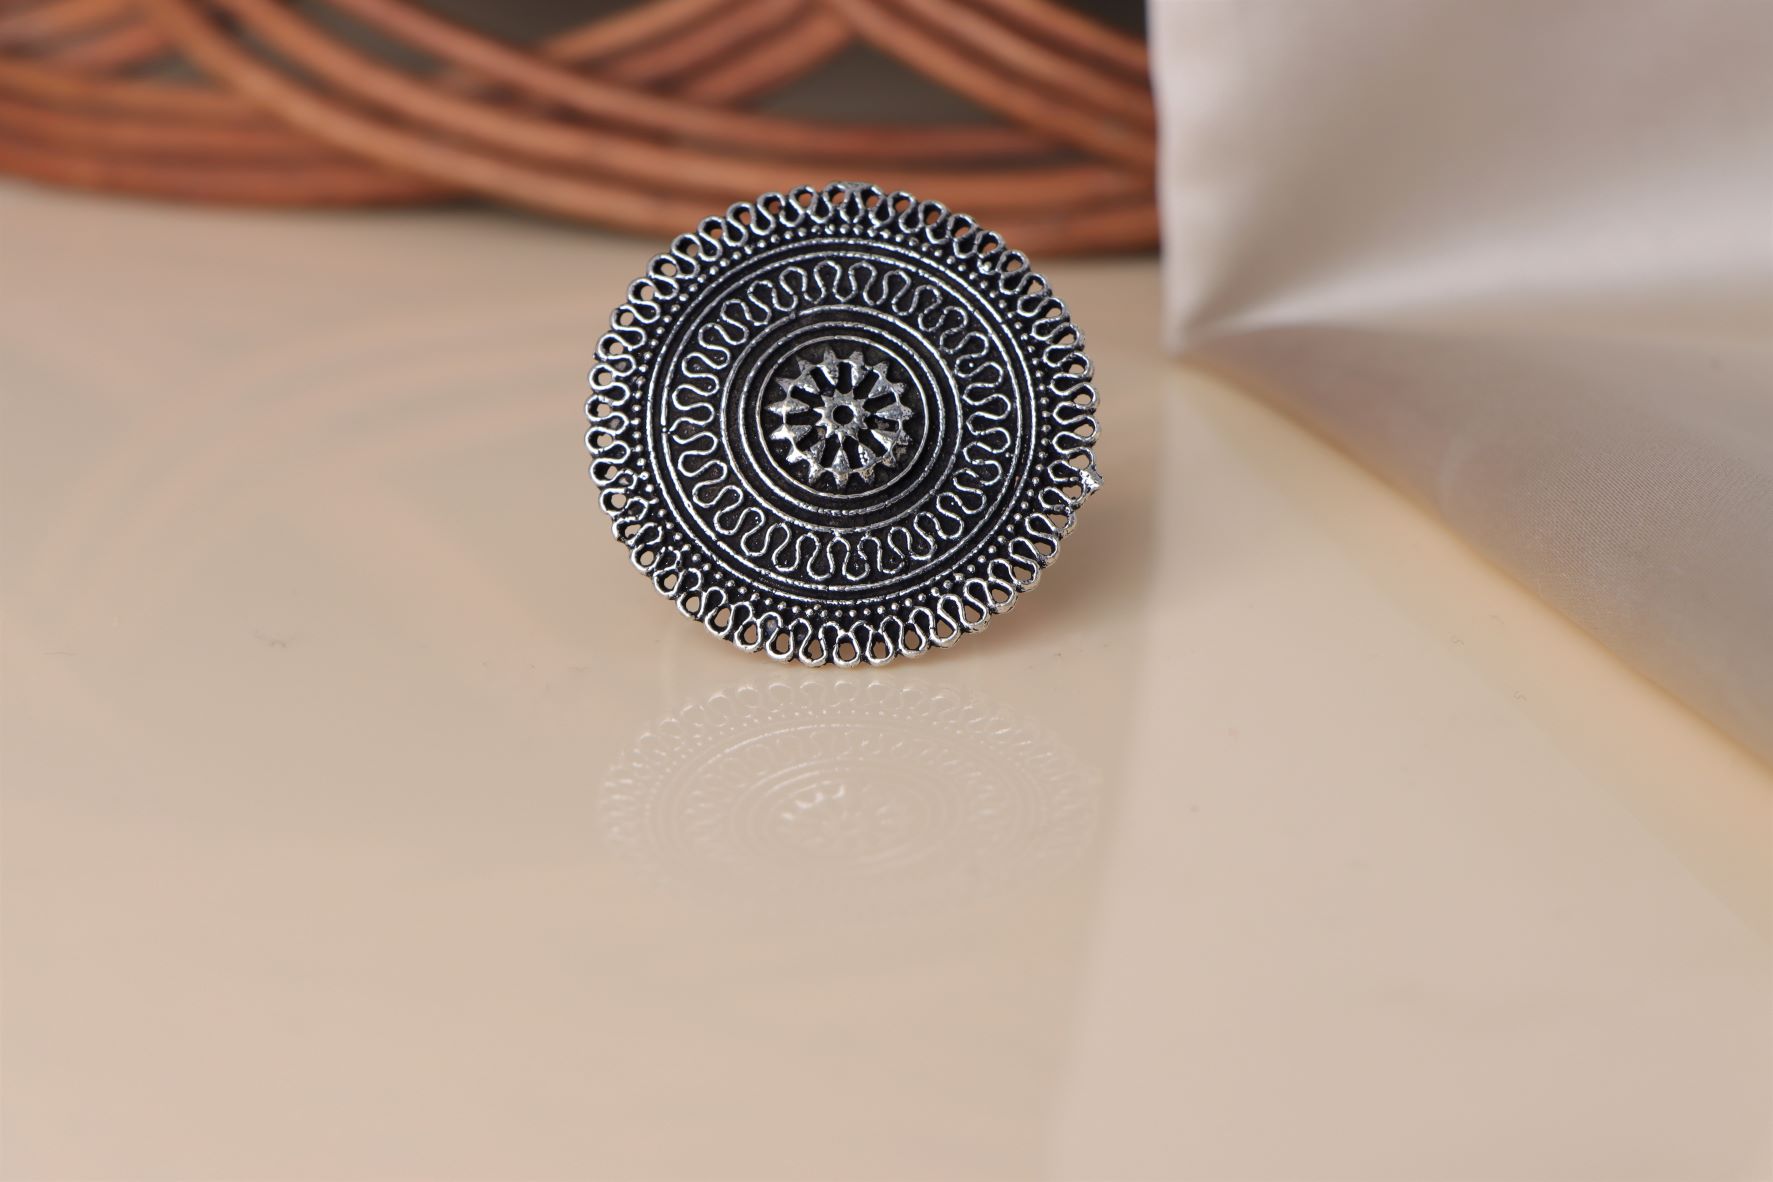 Giftpiper Statement Finger Ring In Oxidized Metal Pattern 7 - Richa Pandey  - 2653766